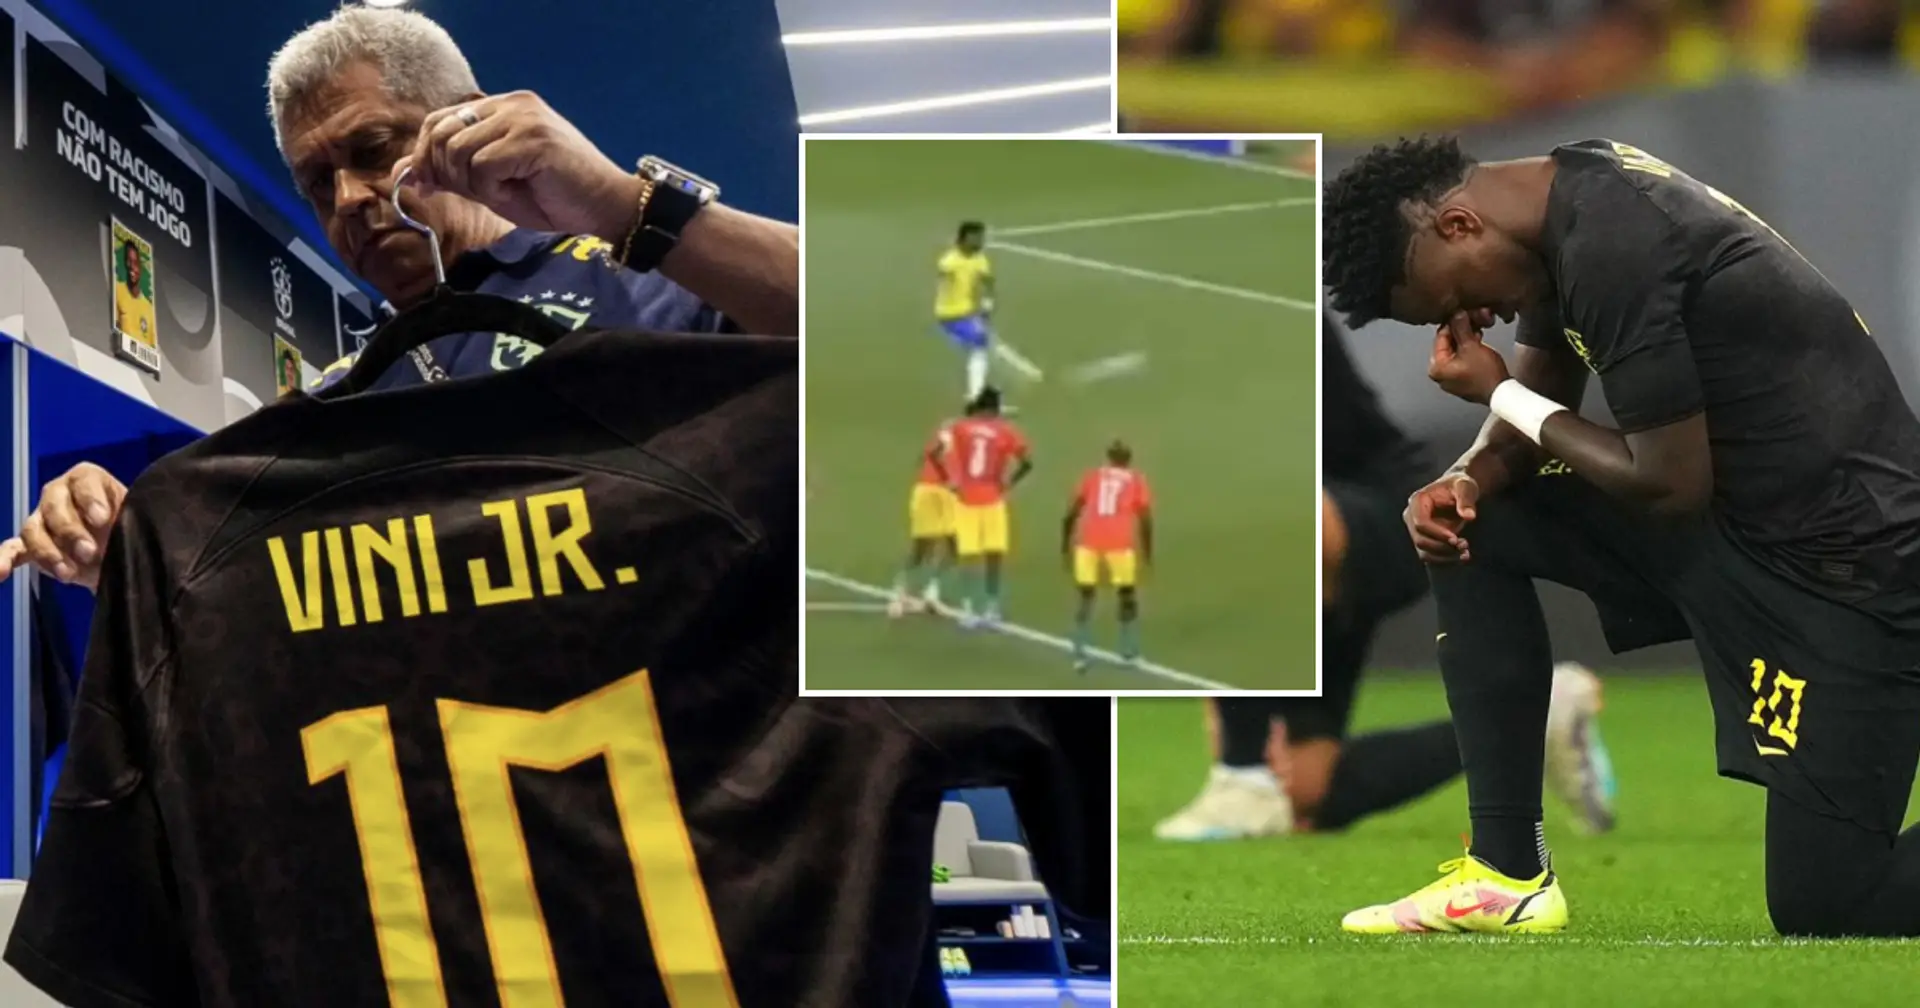 Explained: why Brazil wore black jerseys v Guinea -- has to do with Vinicius